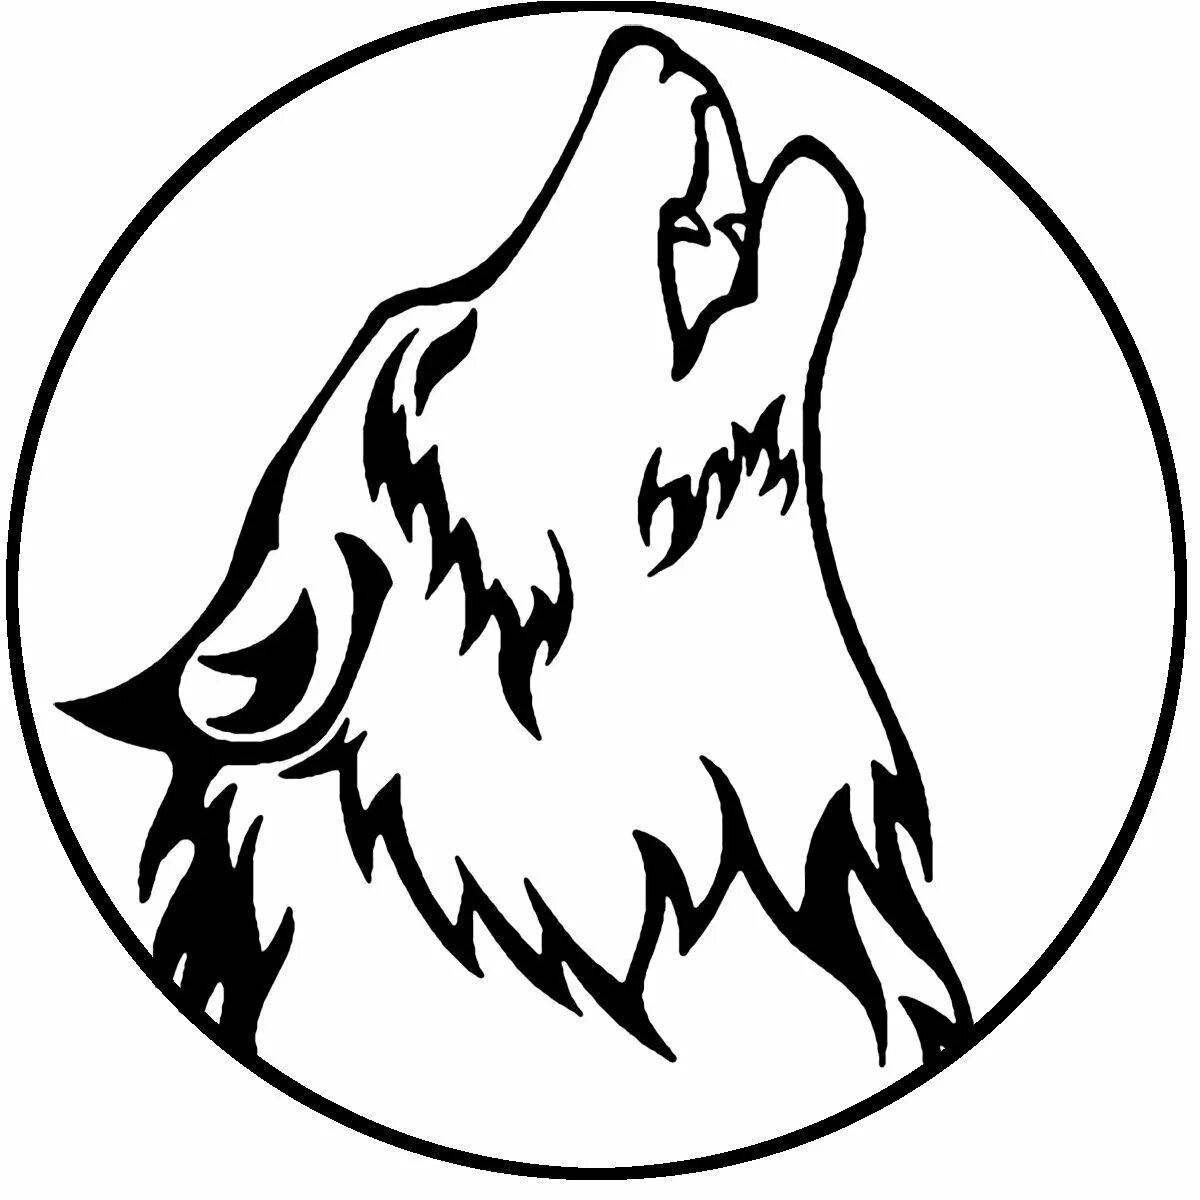 Coloring page elegant wolf howling at the moon